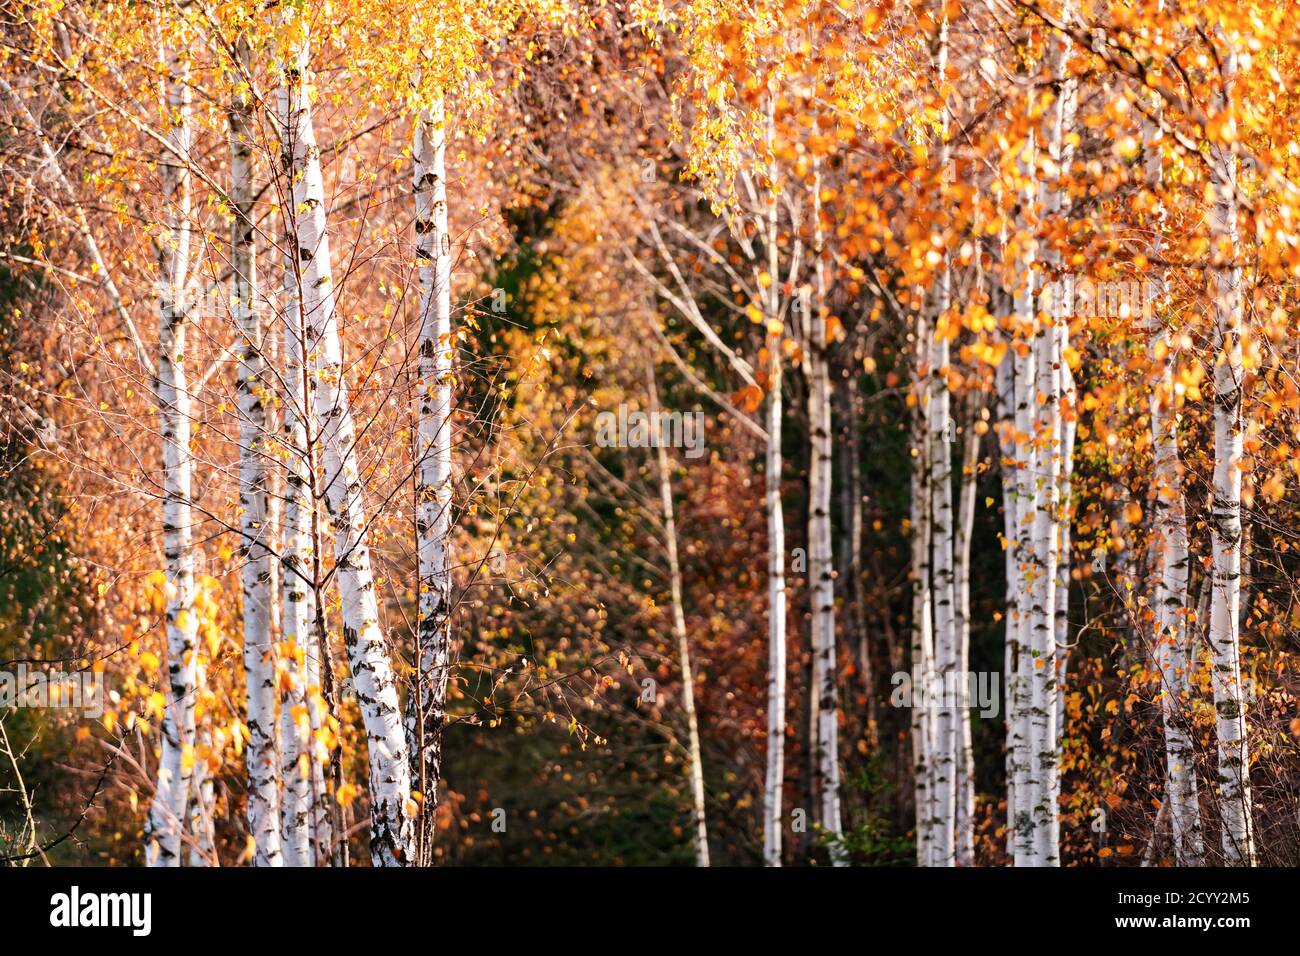 Majestic birch forest with yellow and orange folliage at autumn time. Picturesque fall scene in Carpathian mountains, Ukraine. Landscape photography Stock Photo